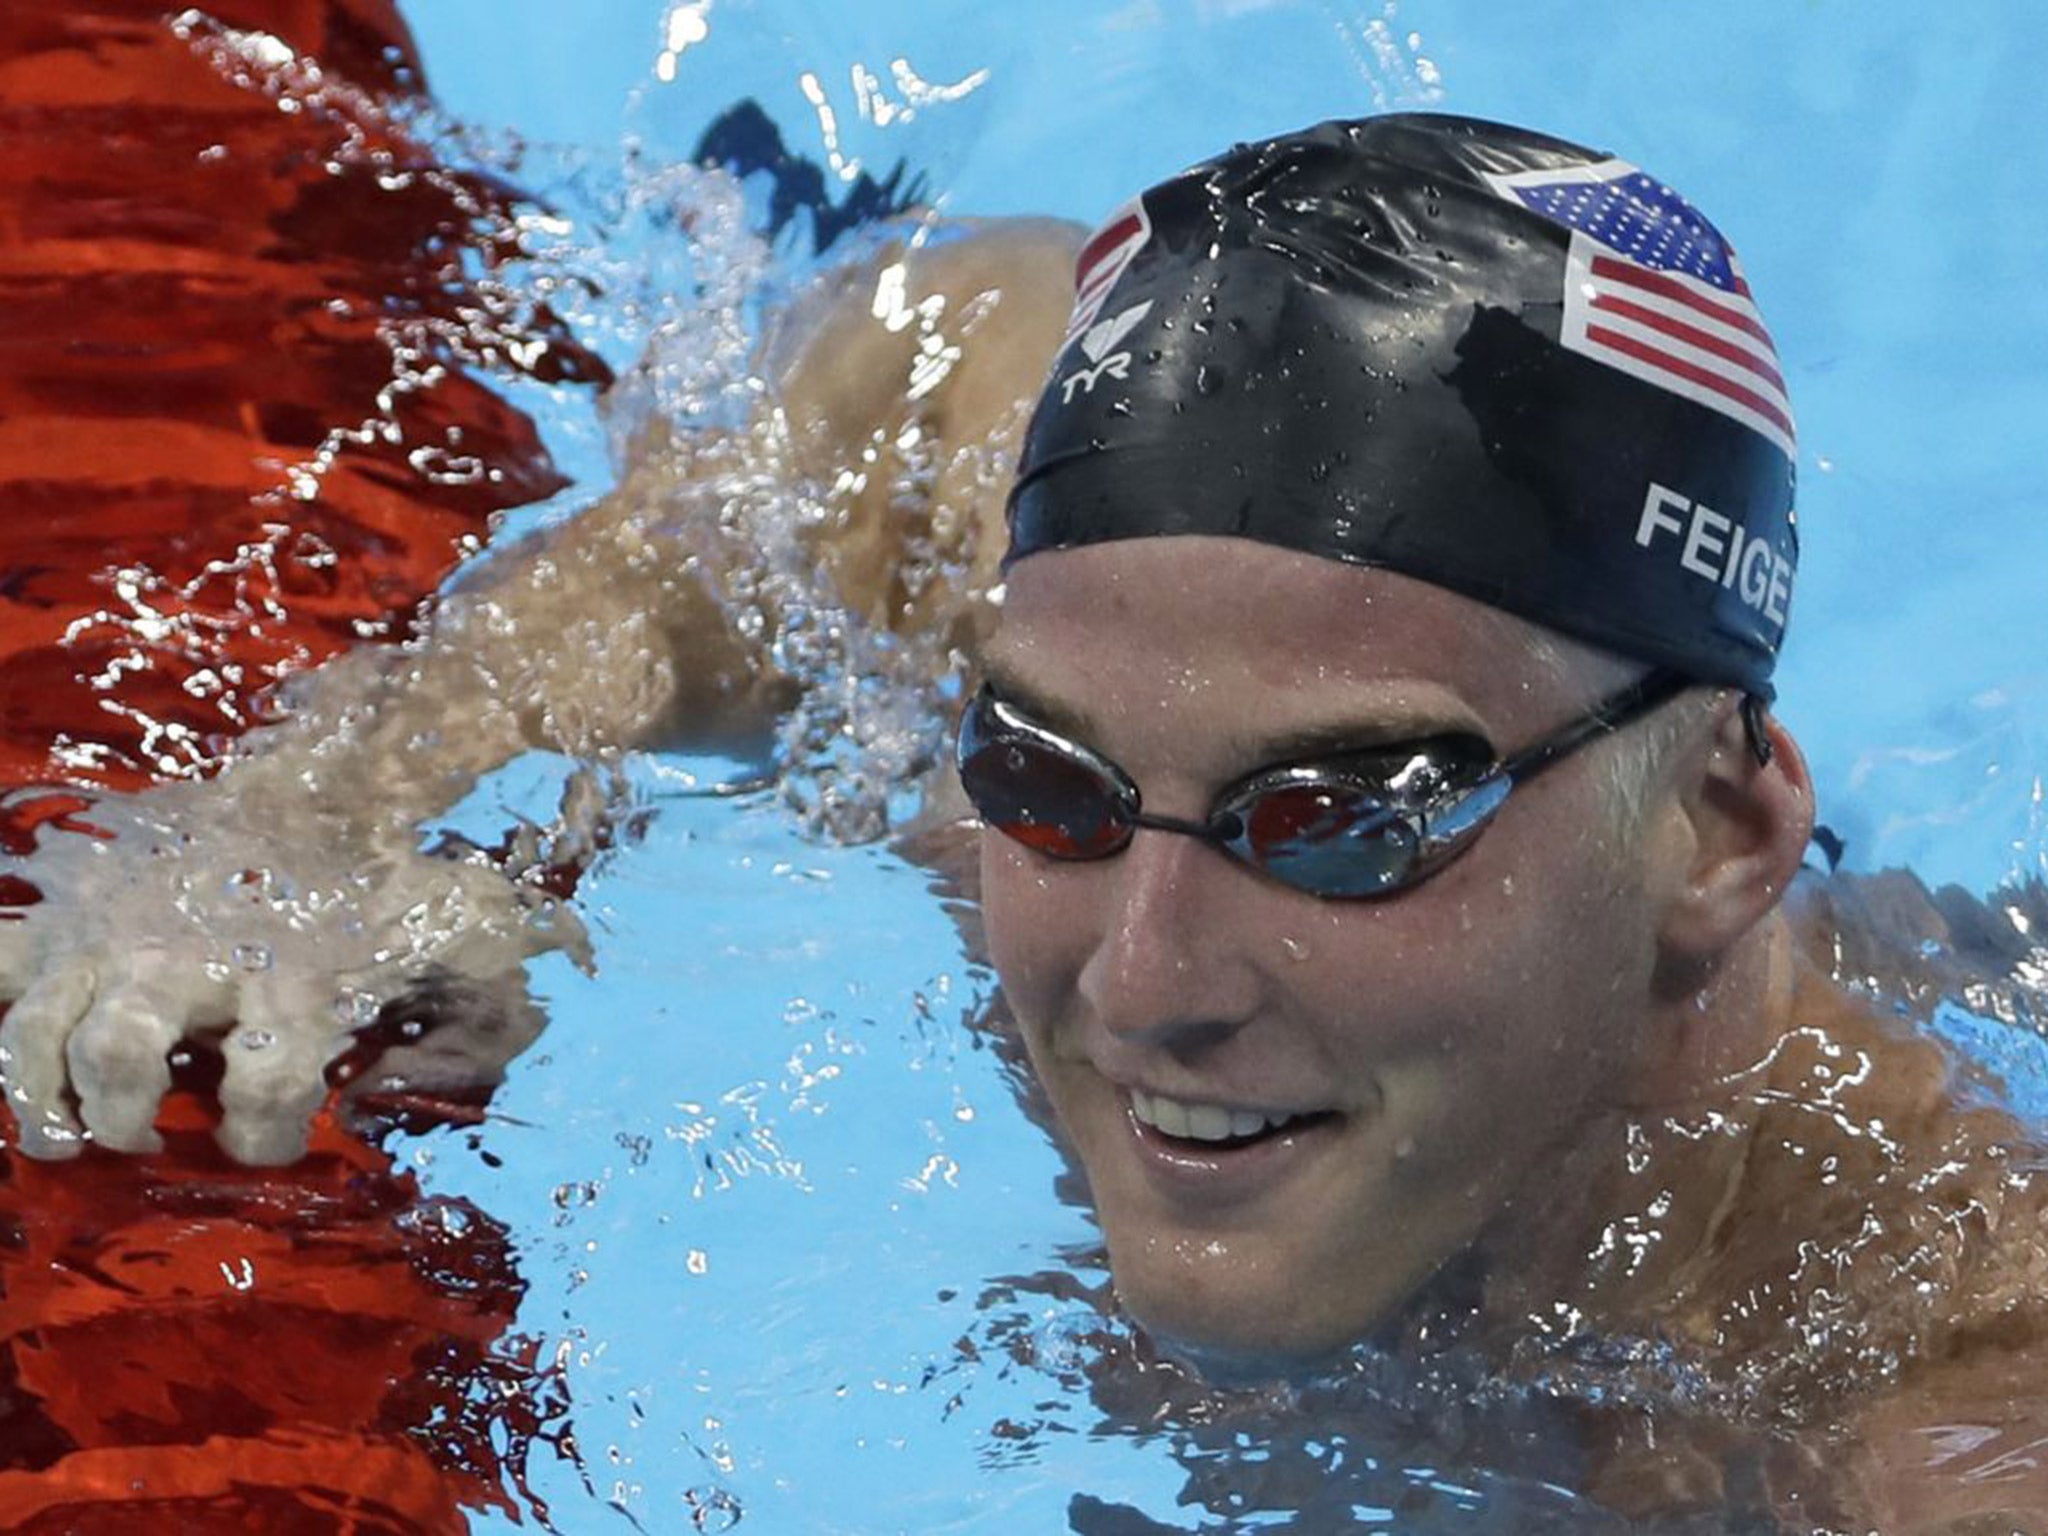 James Feigen has to pay a $10,800 fine in order to retrieve his passport and leave Rio de Janeiro